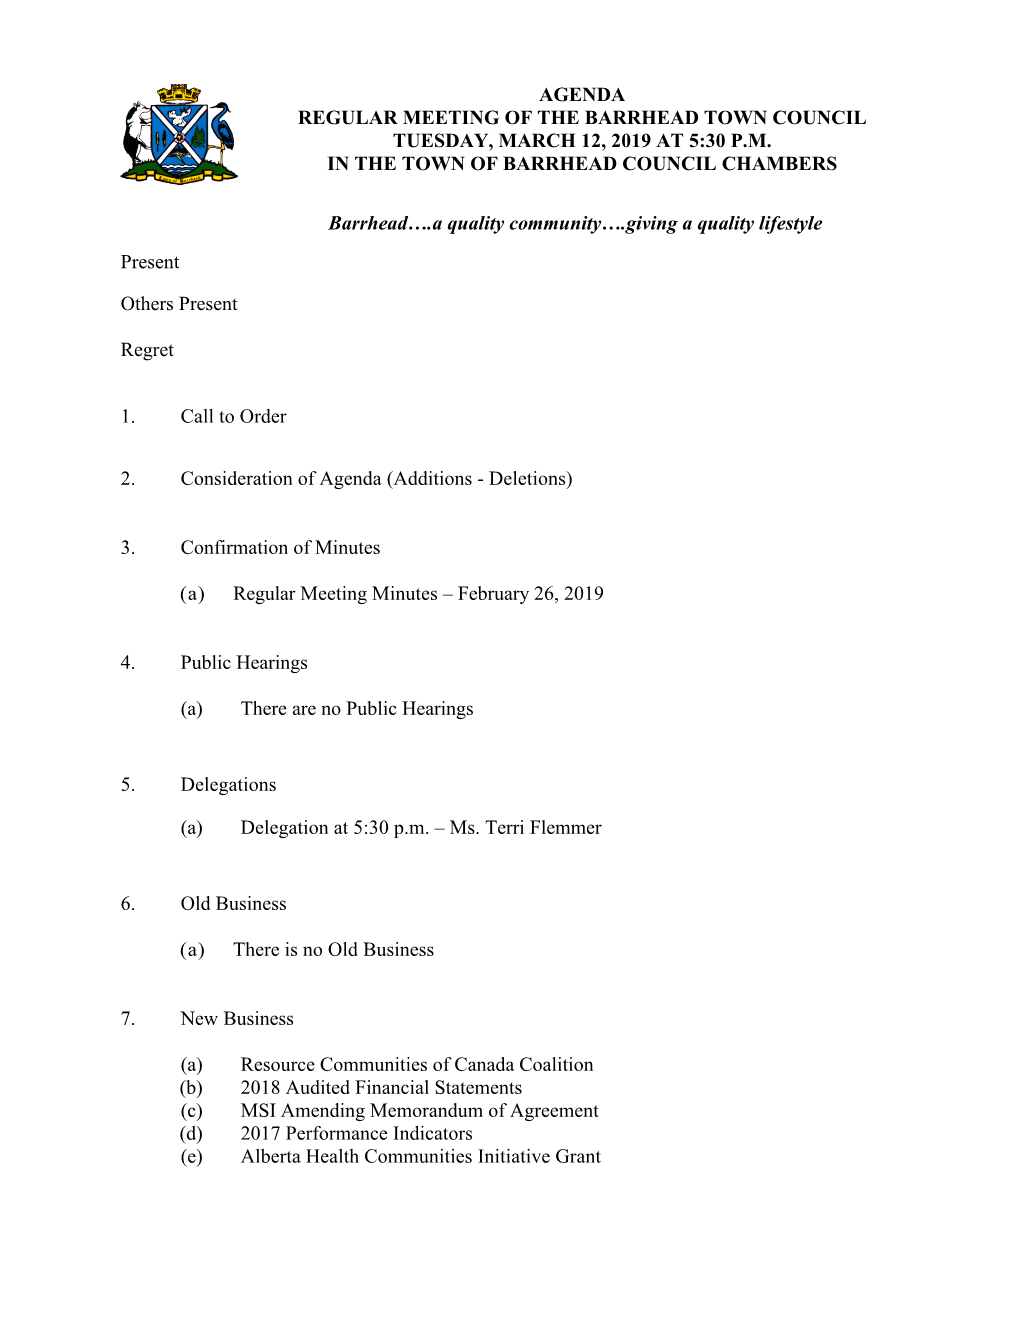 Agenda Regular Meeting of the Barrhead Town Council Tuesday, March 12, 2019 at 5:30 P.M